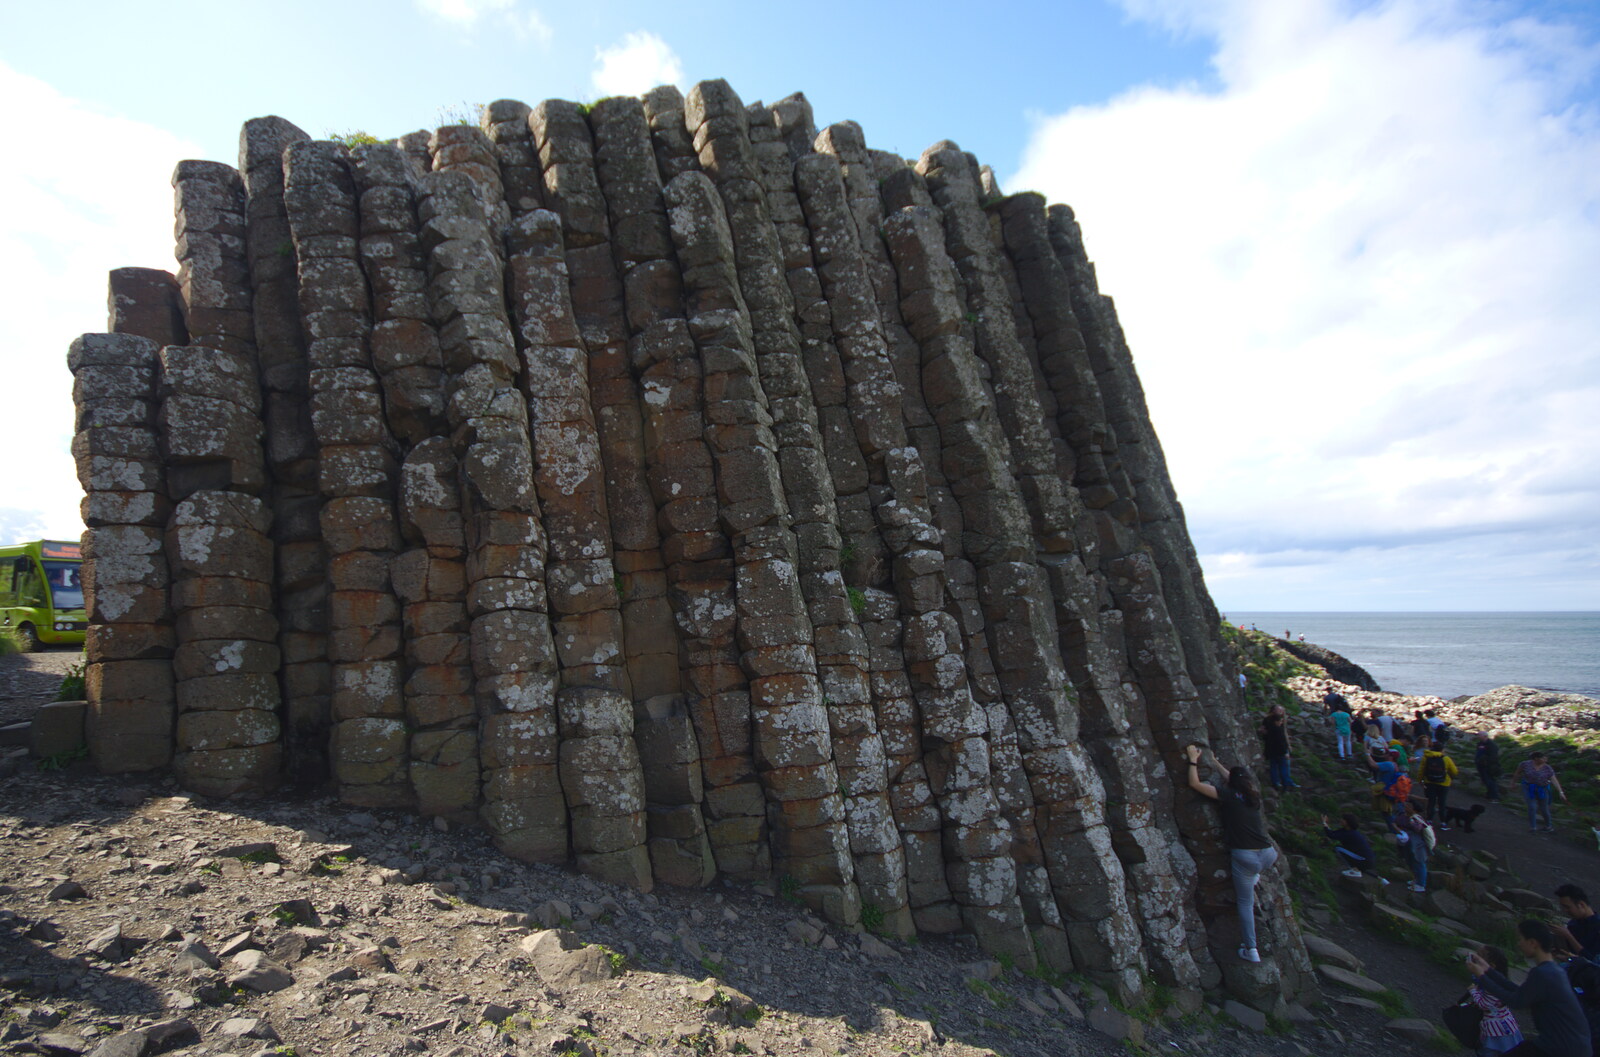 A big standing pile of hexagons from The Giant's Causeway, Bushmills, County Antrim, Northern Ireland - 14th August 2019